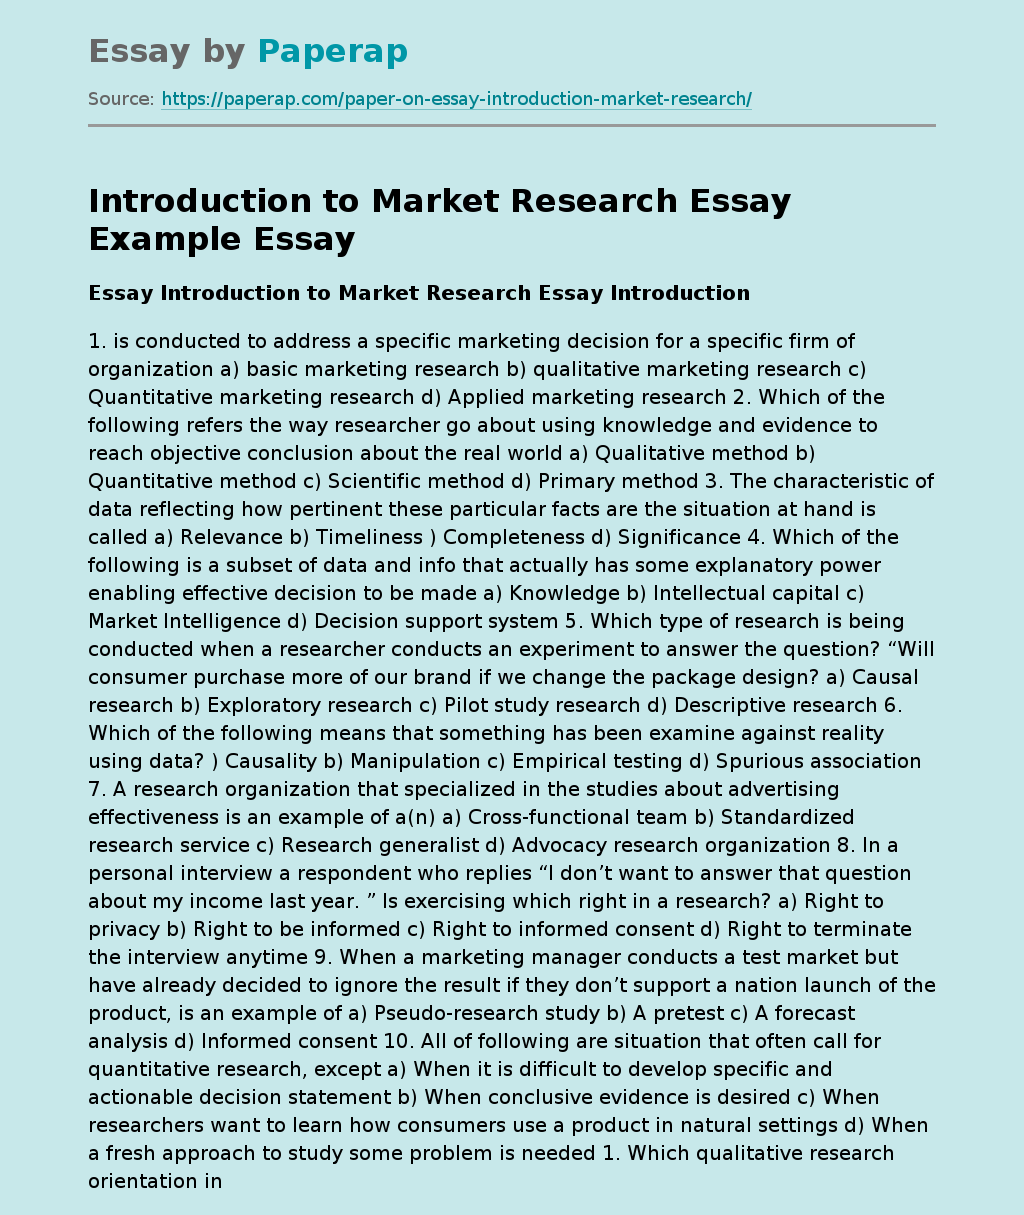 what is the market research essay